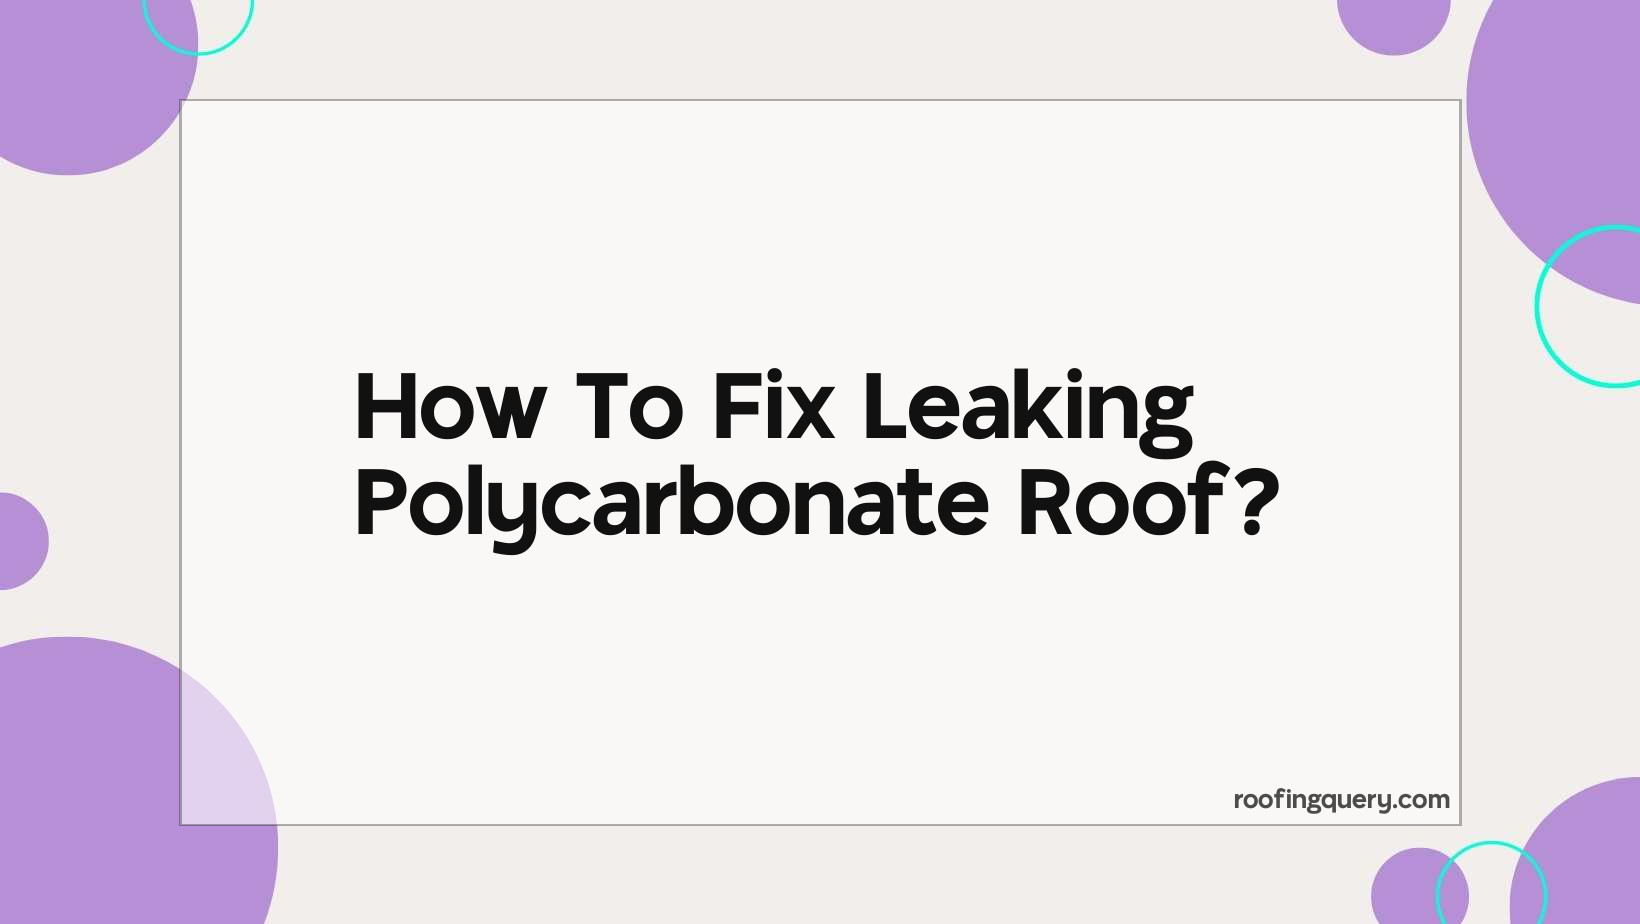 How To Fix Leaking Polycarbonate Roof?